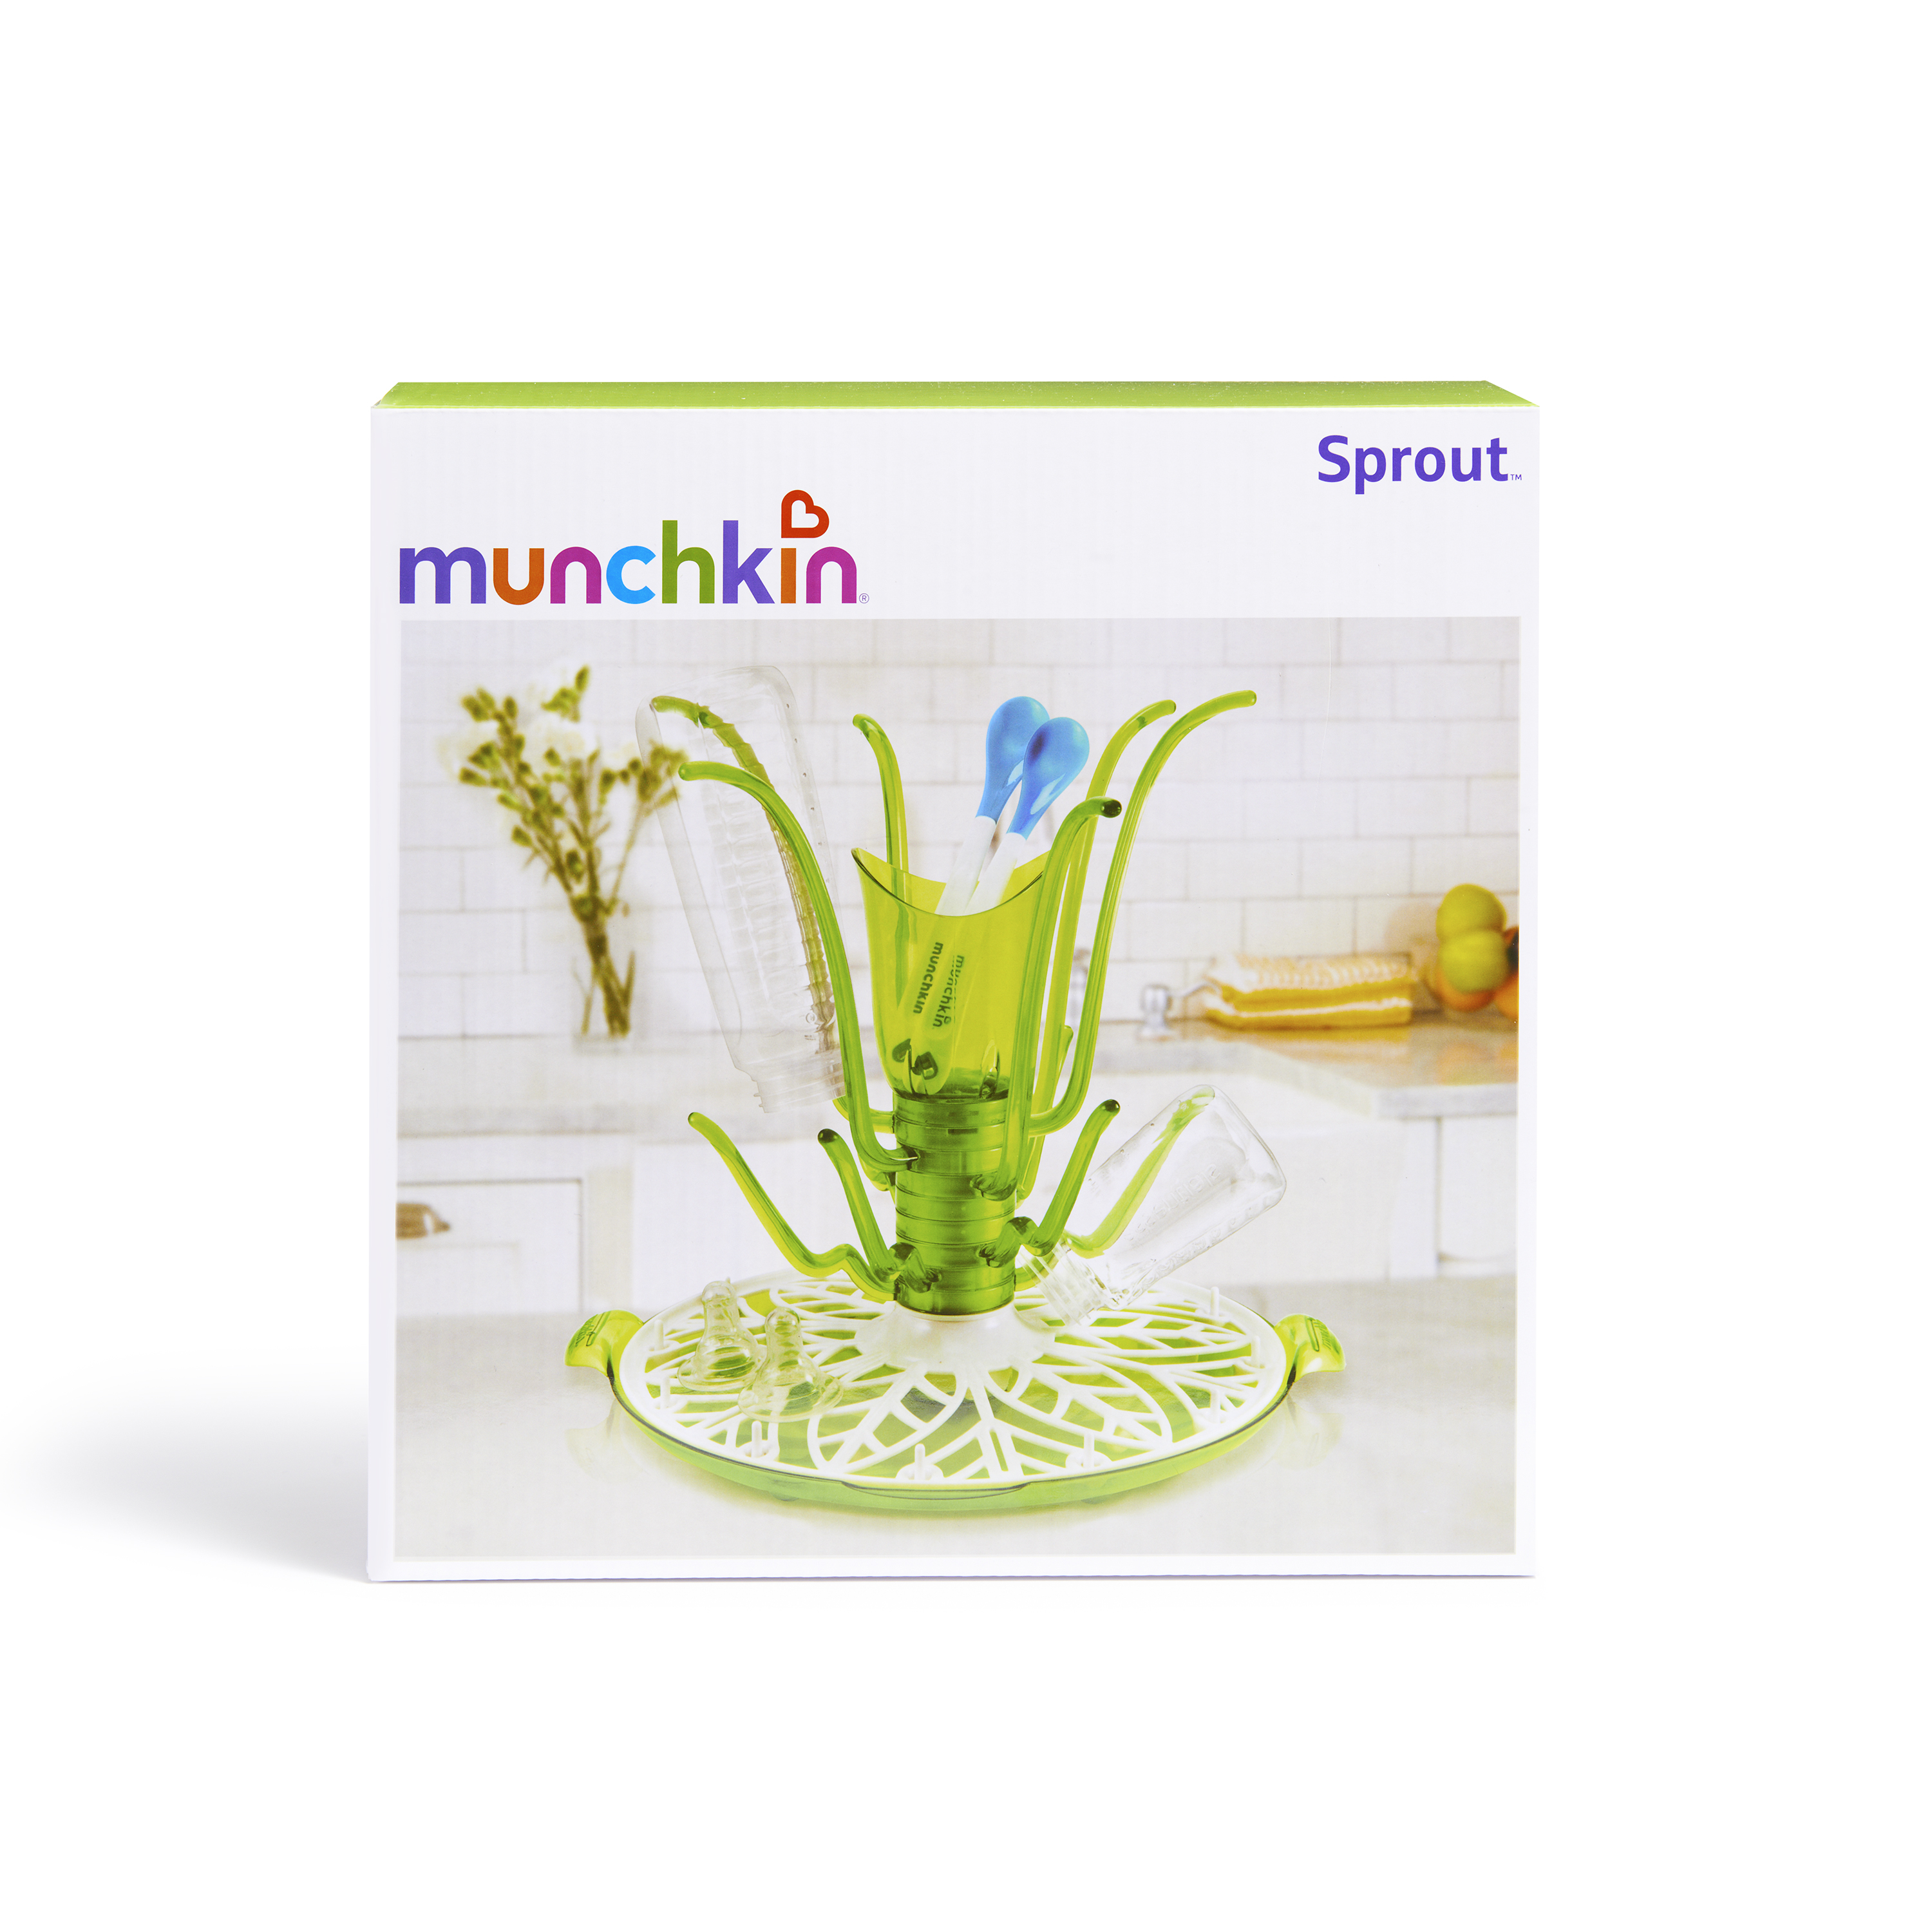 Munchkin Sprout Drying Rack - image 4 of 5